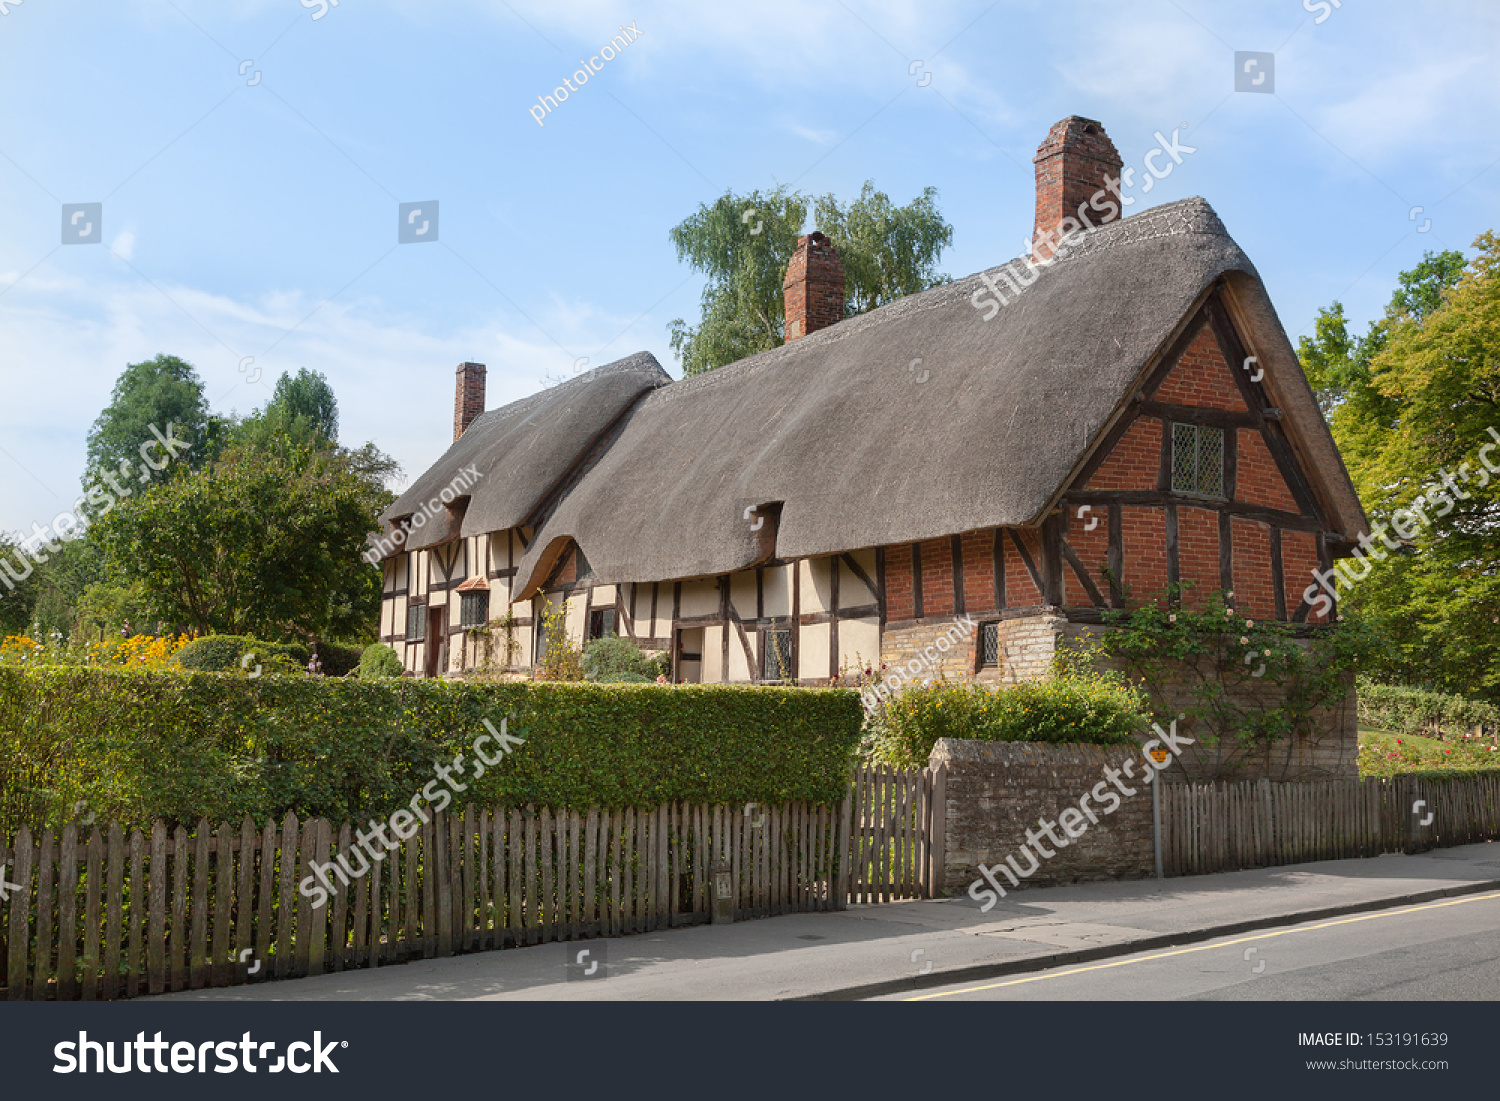 Anne Hathaway's (William Shakespeare's wife) thatched cottage and garden at Shottery,  Stratford upon Avon, England #153191639